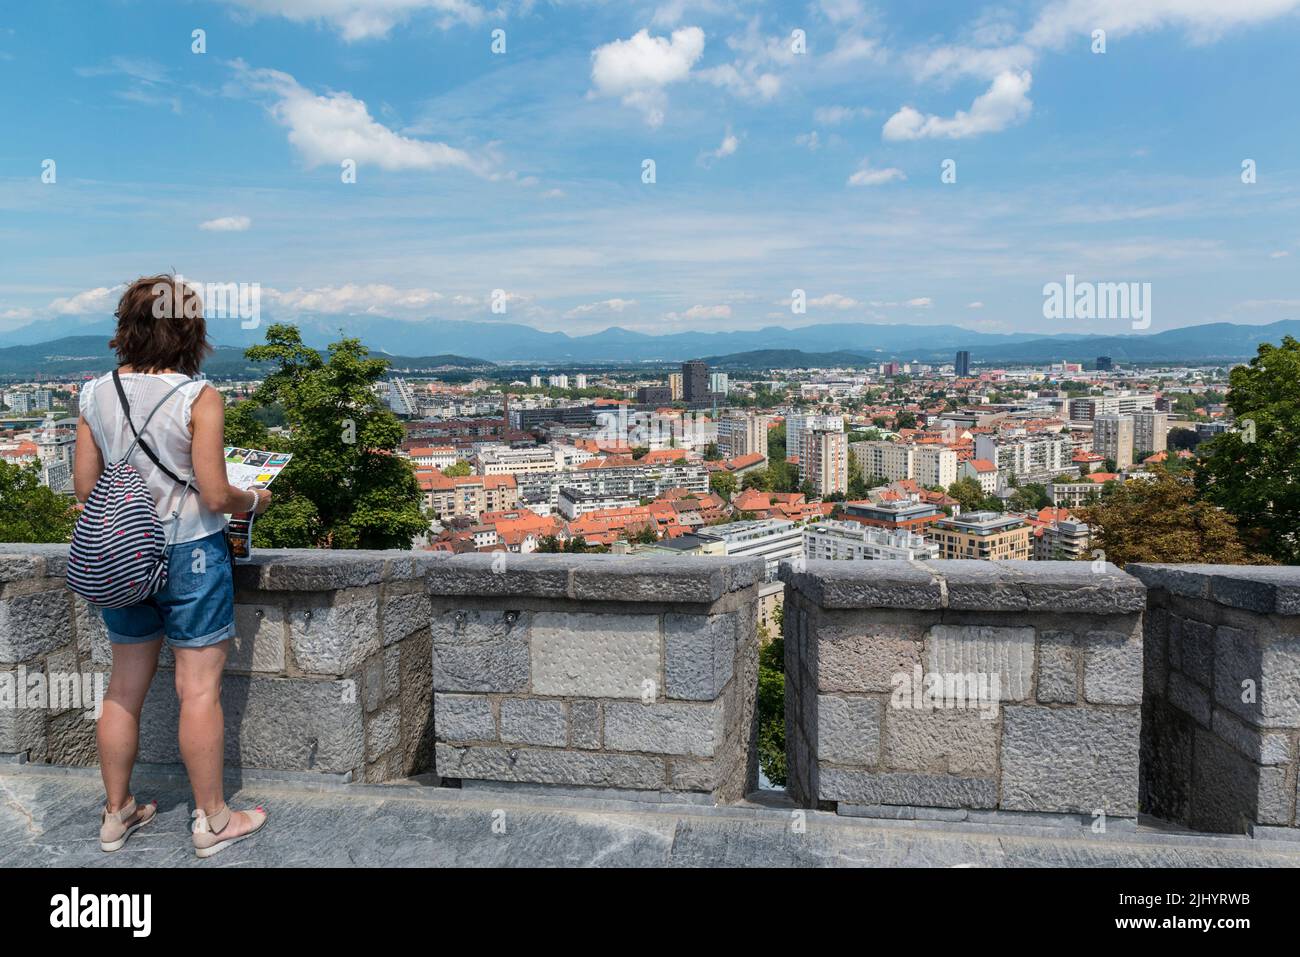 Female tourist with city map overlooking the city of Ljubljana from the old castle battlements. Ljubljana, Slovenia Stock Photo